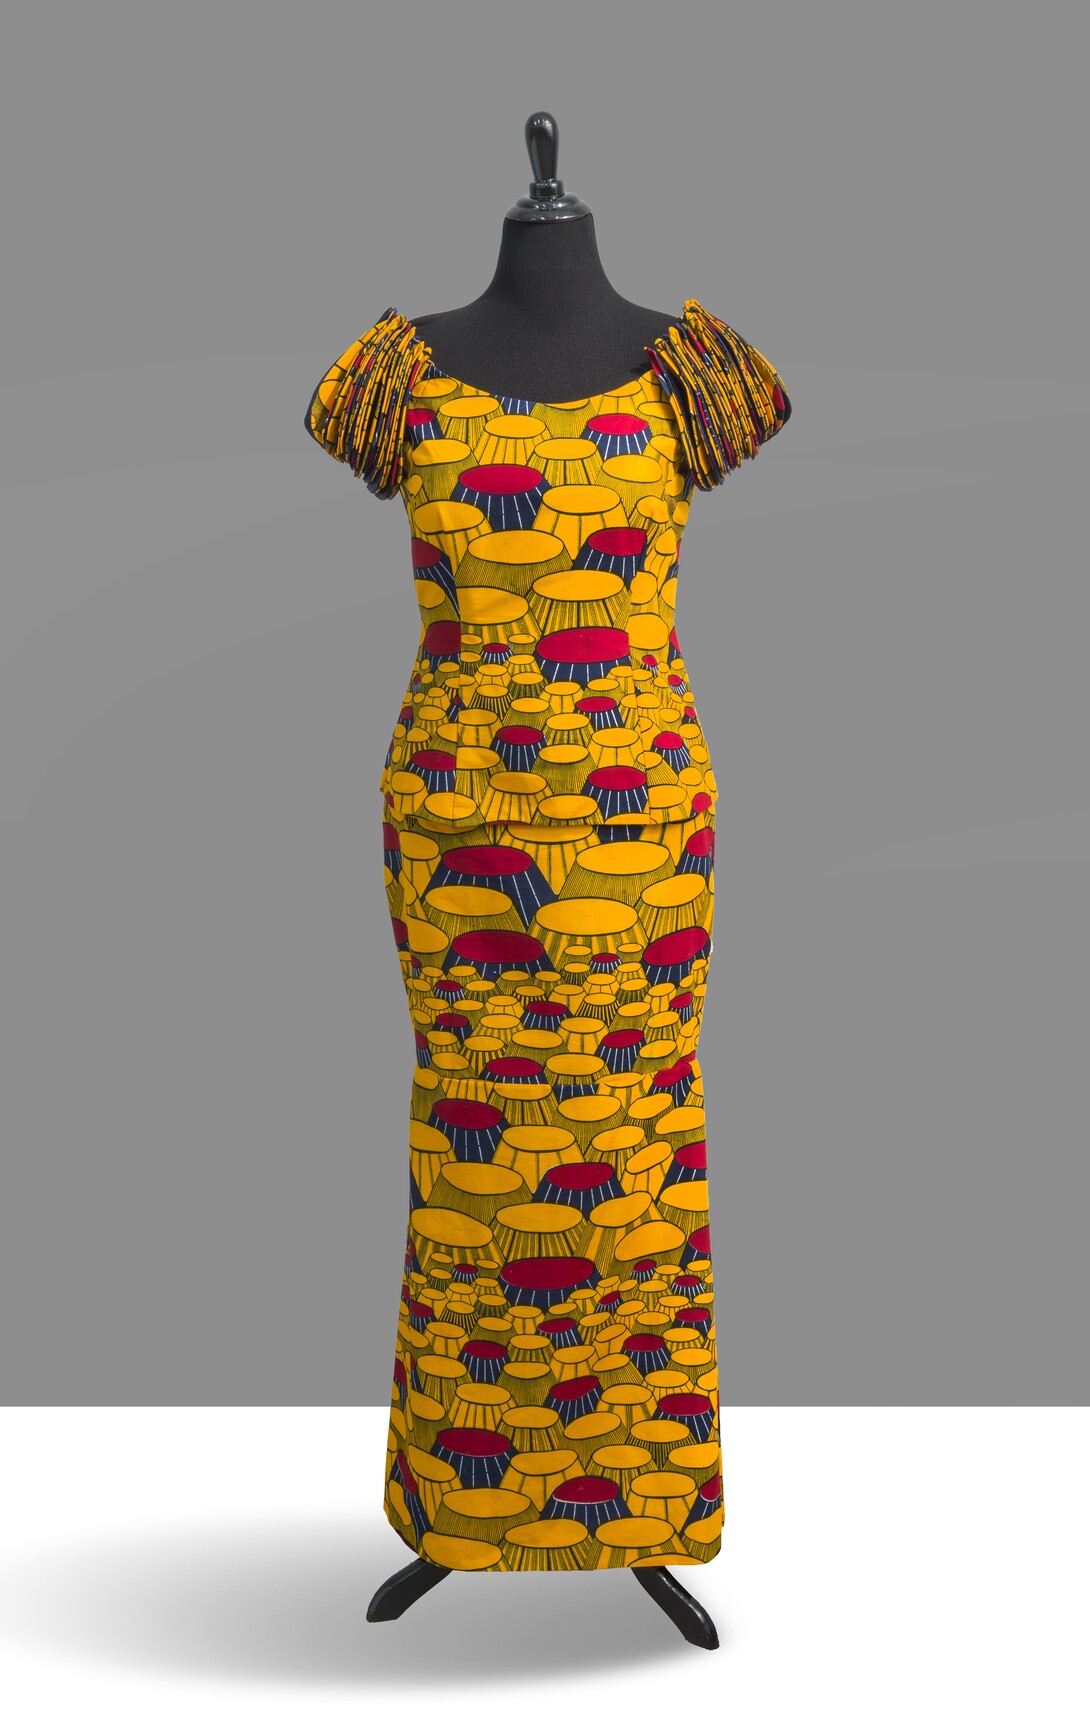 King's Chair Dress Form, introduced in 1980, manufactured by Vlisco, Netherlands; Dutch Wax Block on cotton, 48 x 12 inches.